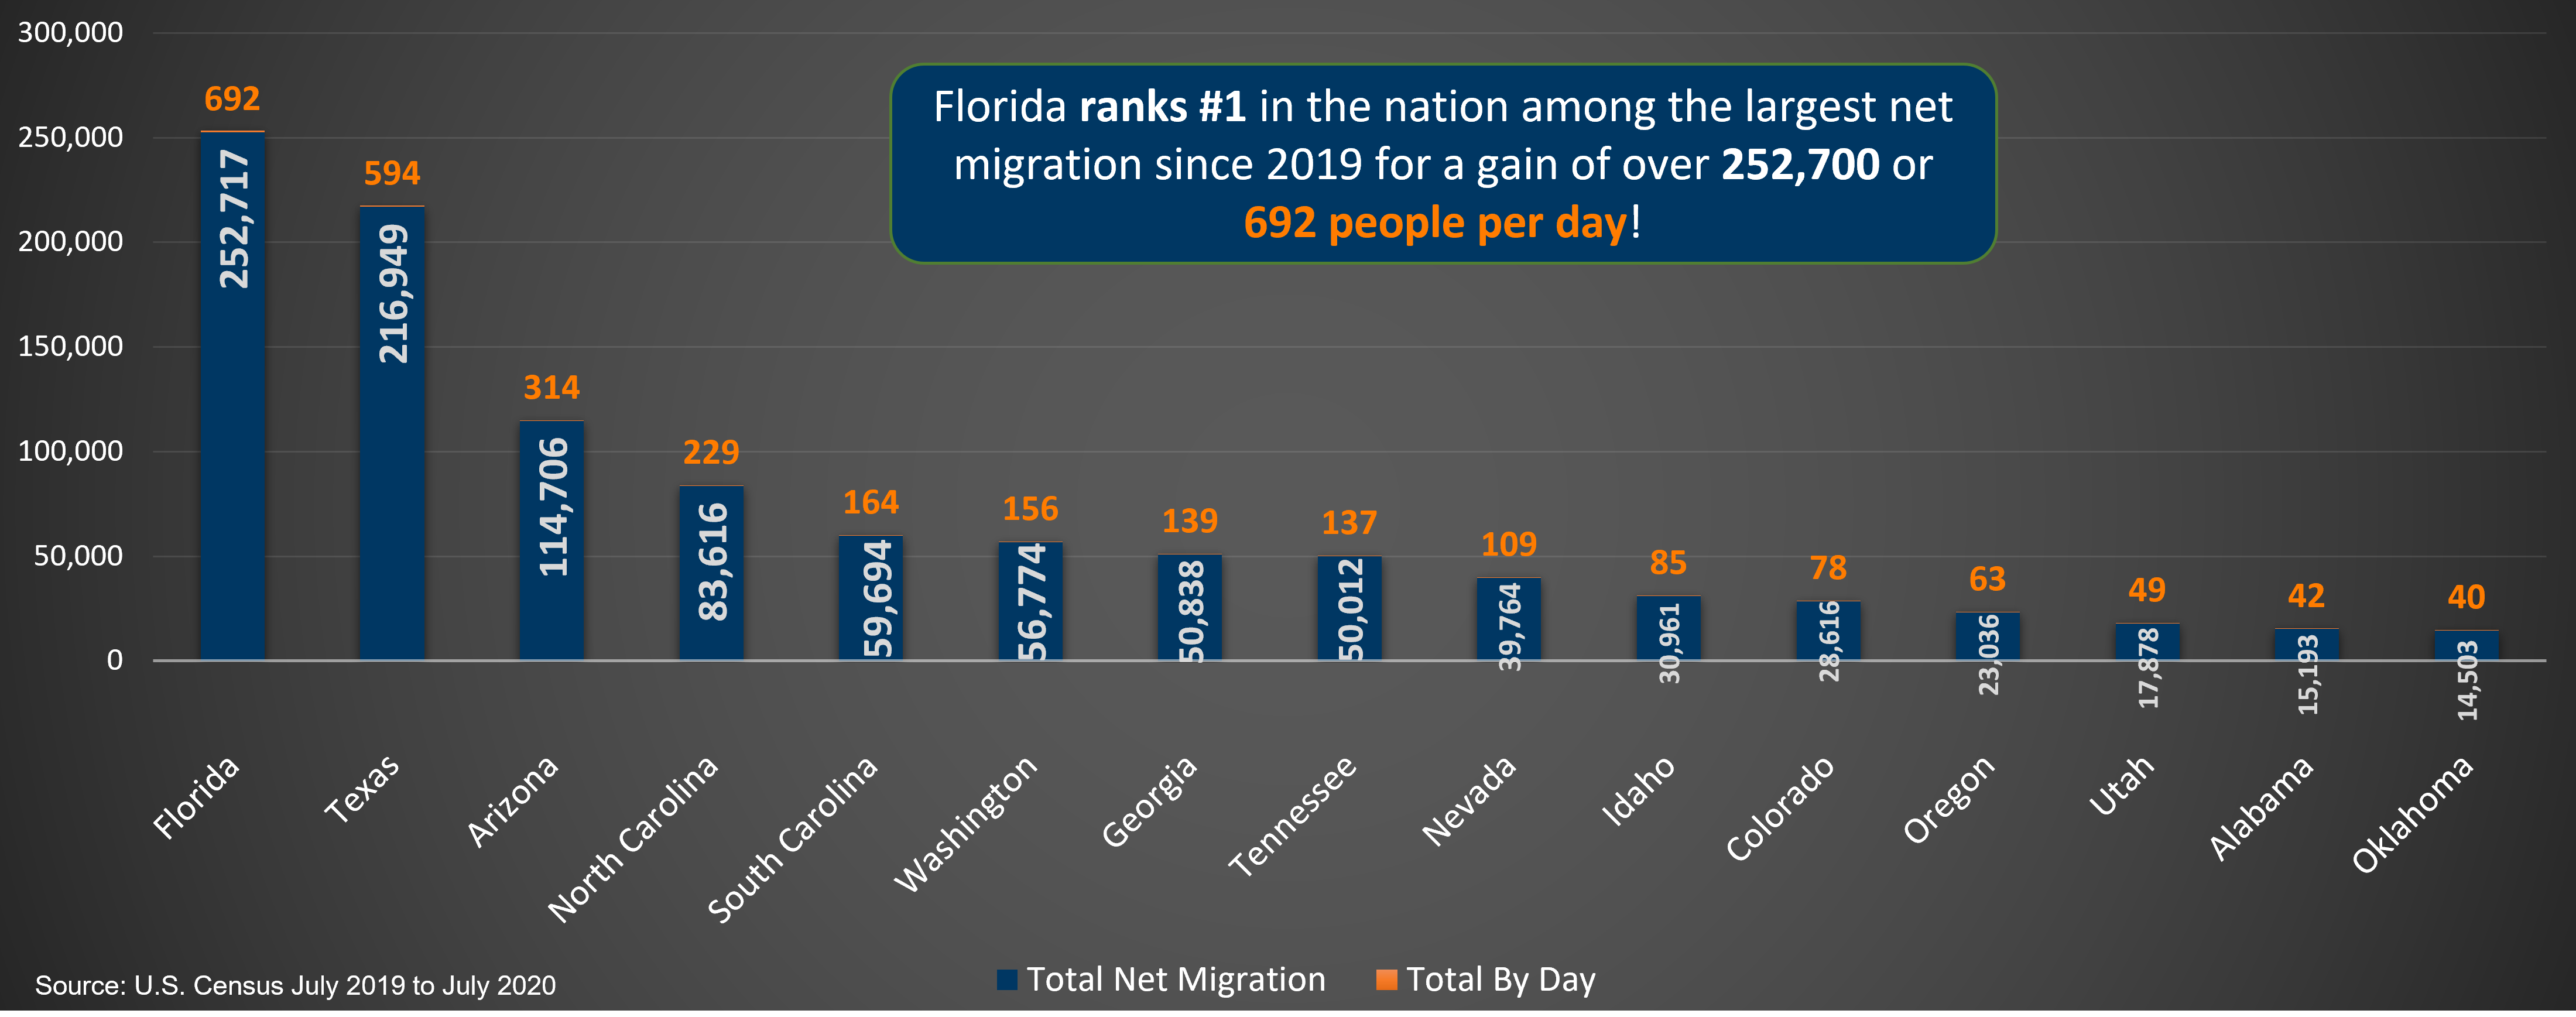 Florida ranks #1 in net migration for fifth consecutive year